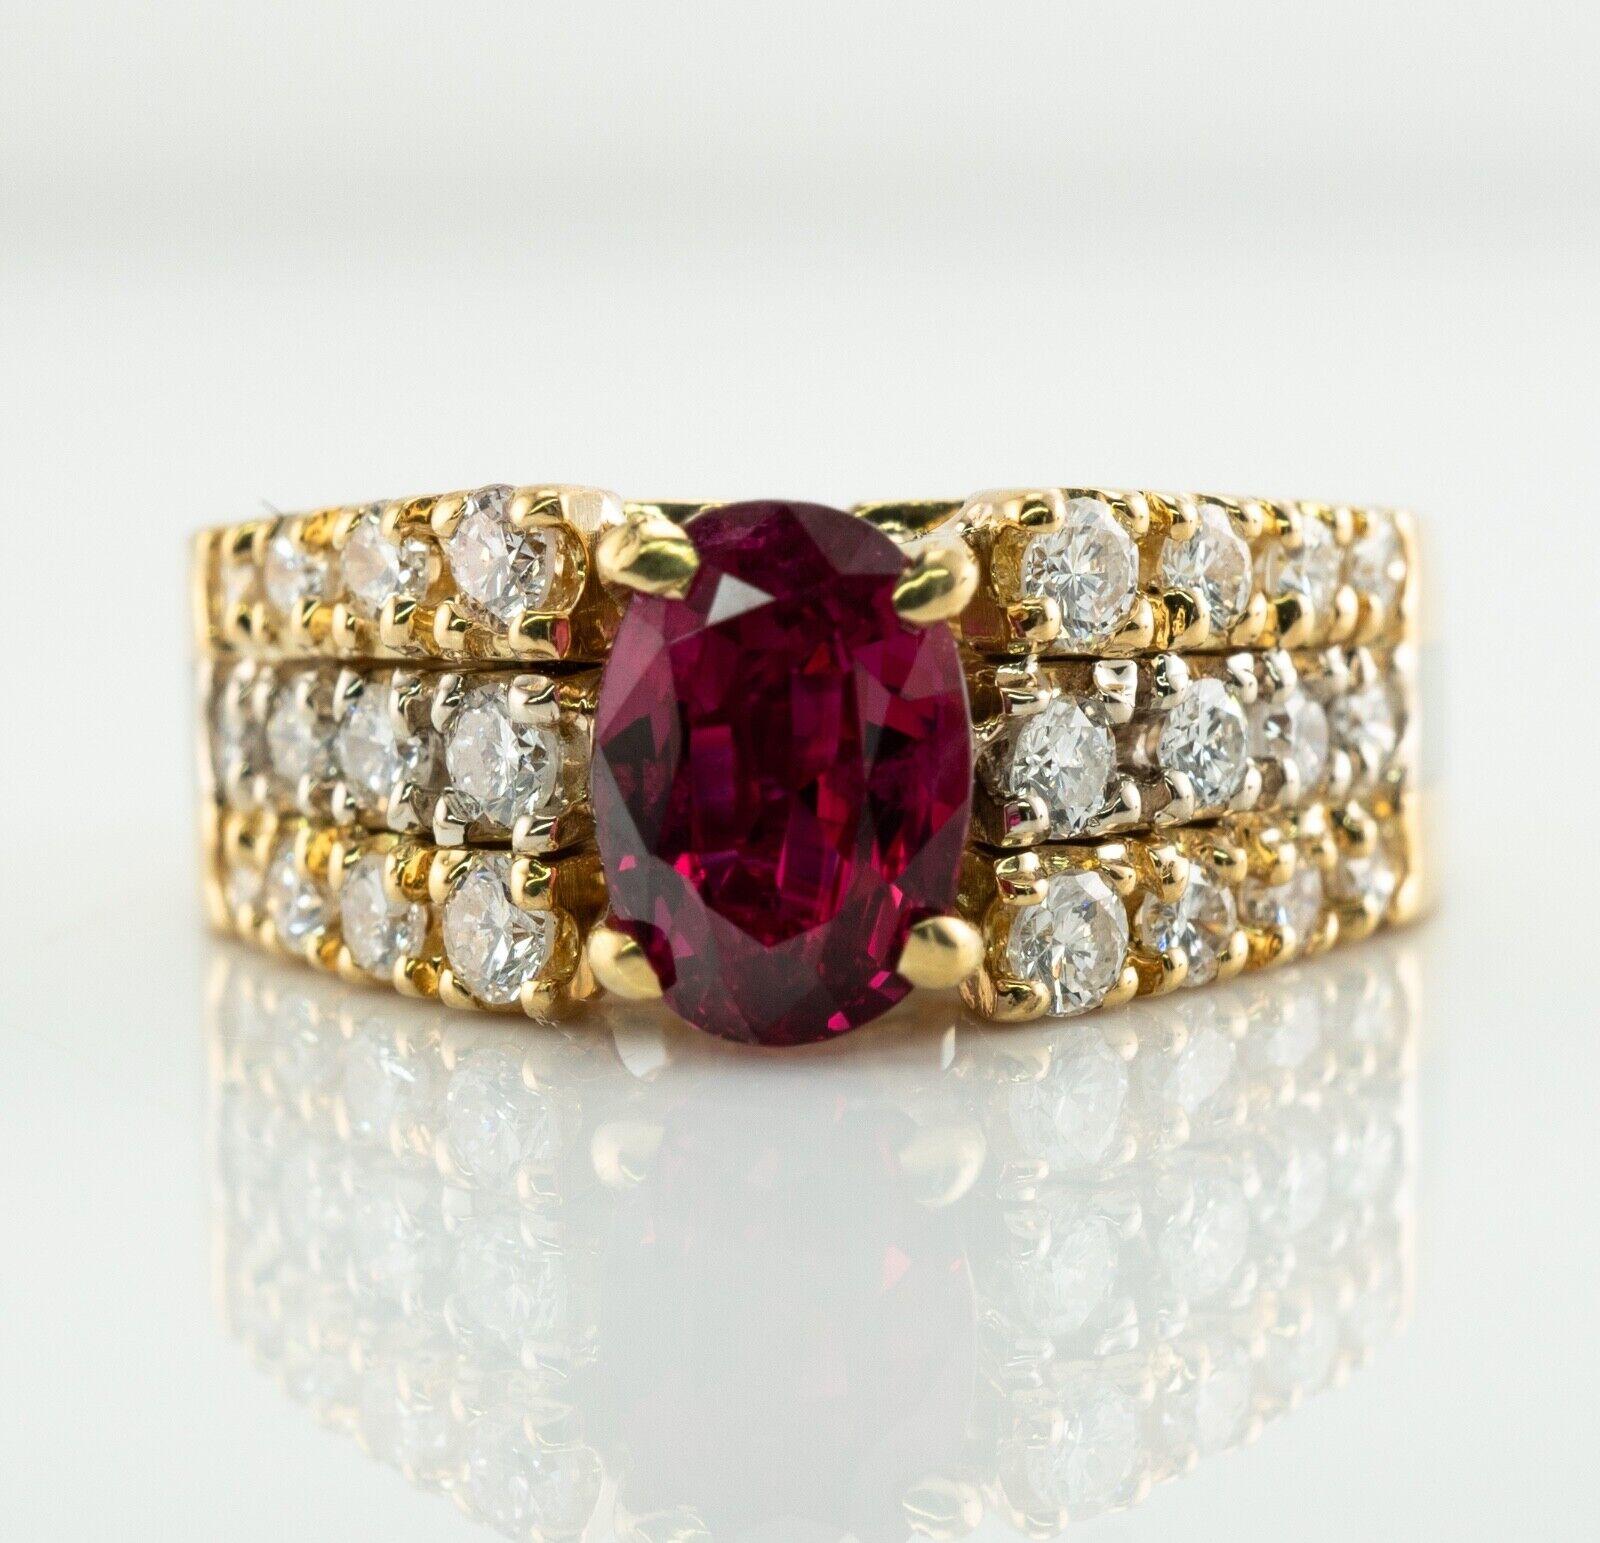 This vintage ring is made in solid 18K Yellow Gold.
It has inscription inside of the shank dated 2.14.82.
The center natural Earth mined Ruby measures 7x5mm (.90 carat).
This stone is very clean and transparent.
24 natural round brilliant cut